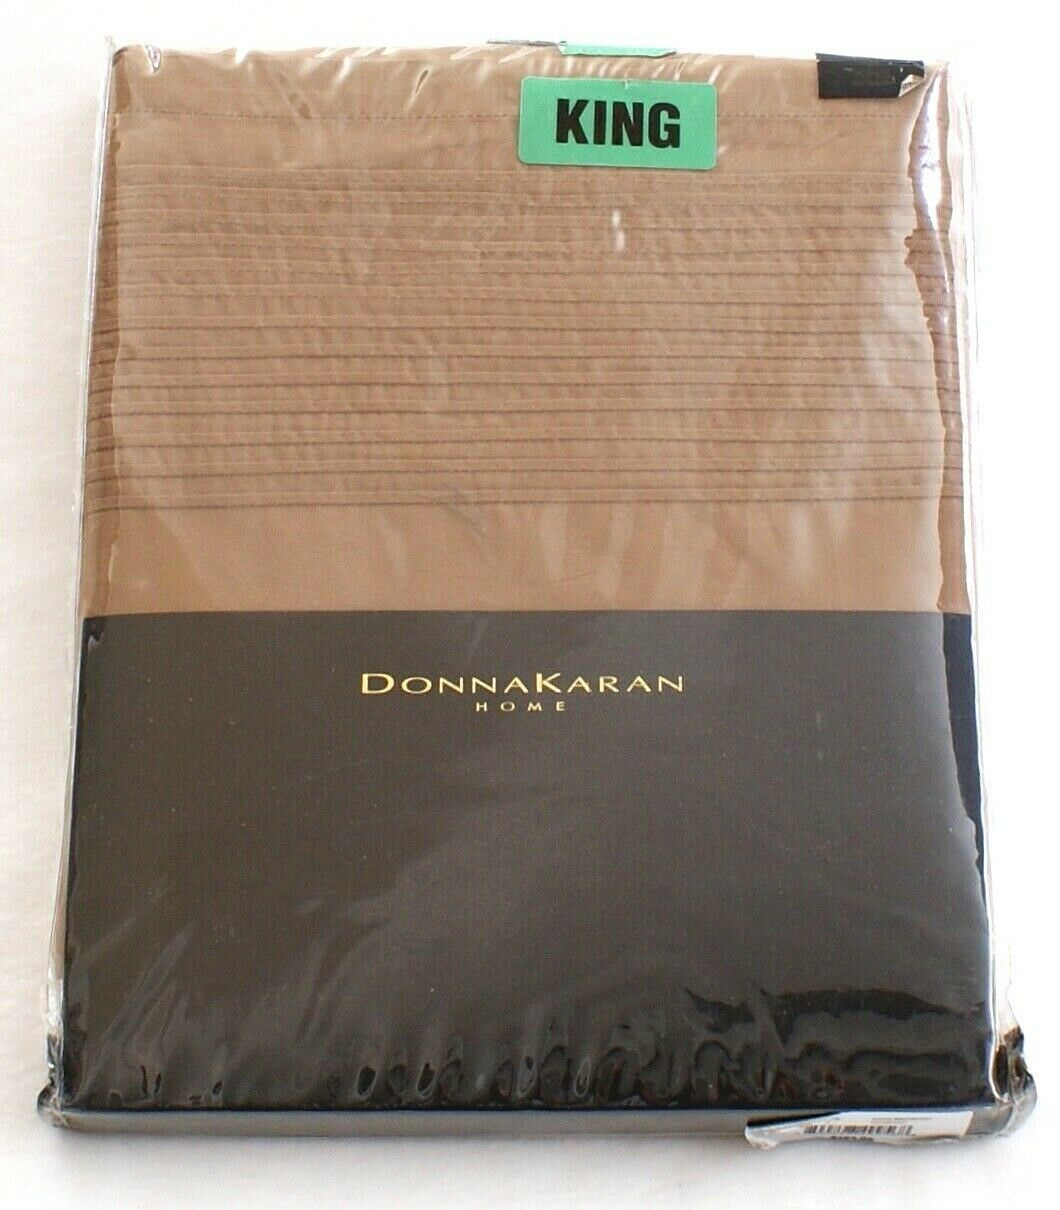 Primary image for Donna Karan Home King Cognac Tuxedo Pleat Bedskirt New in Package $164